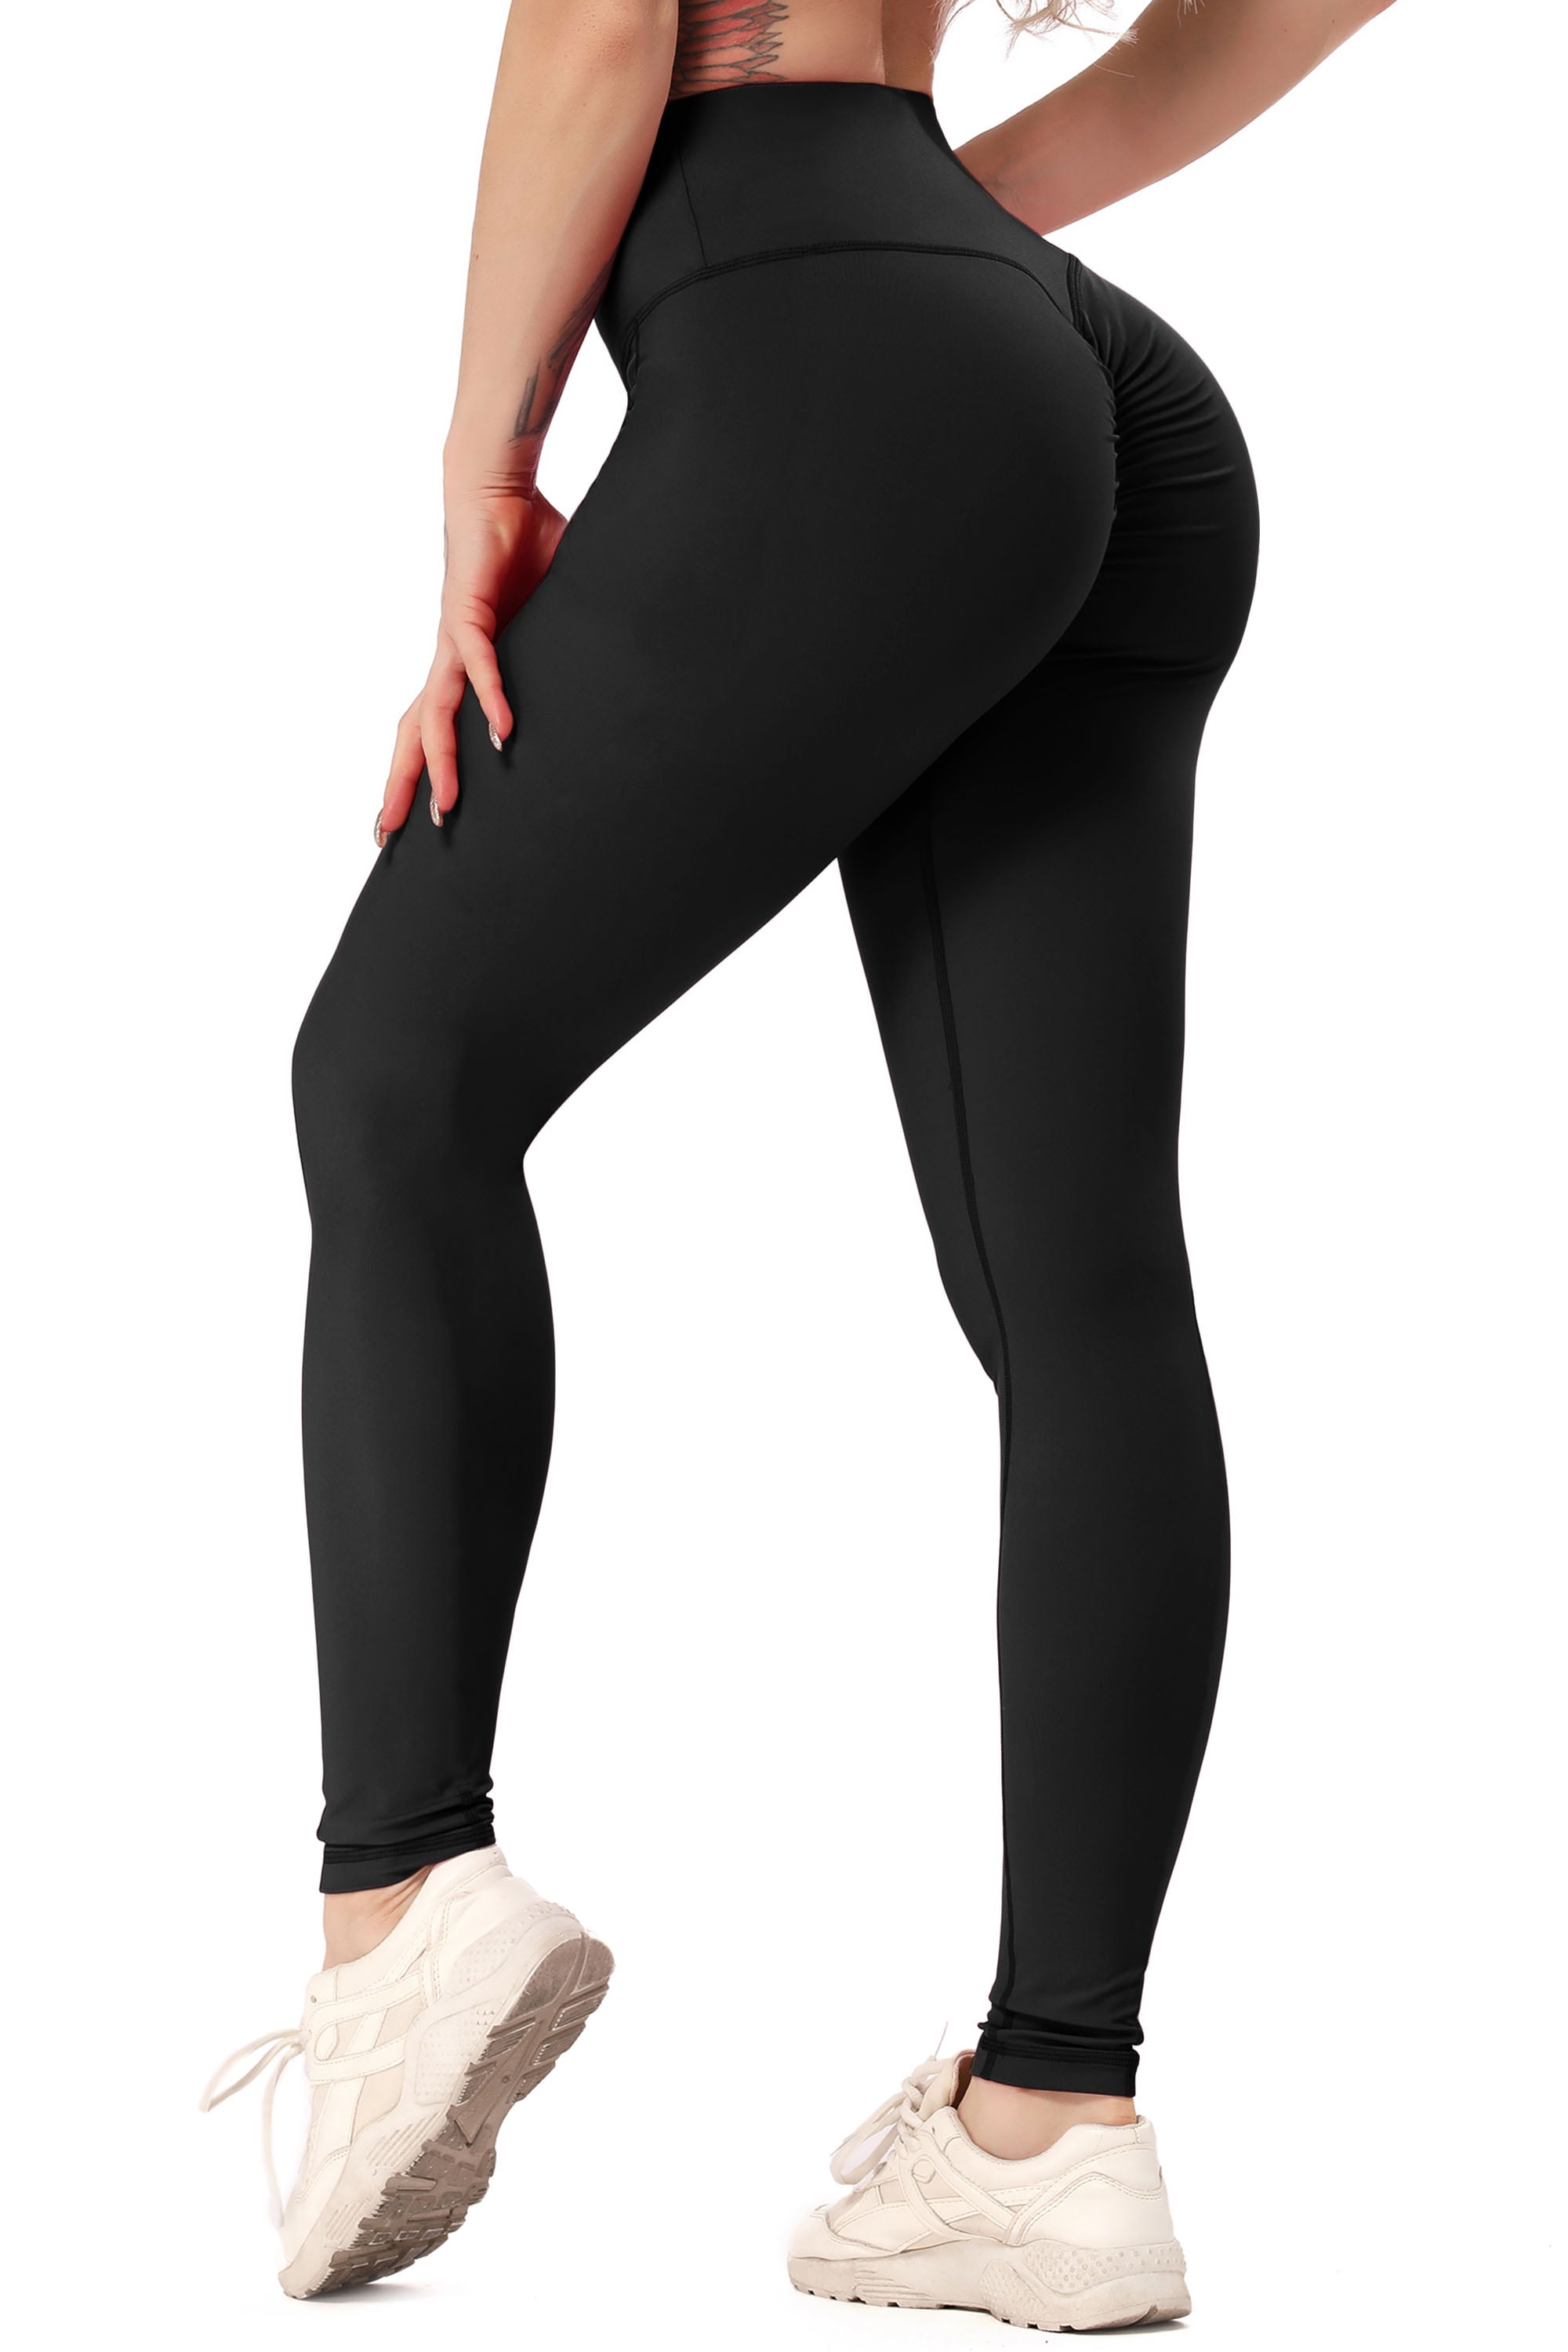 Womens Sports Yoga Fitness Activewear Bottoms Leggings Athletic Pants Collage 